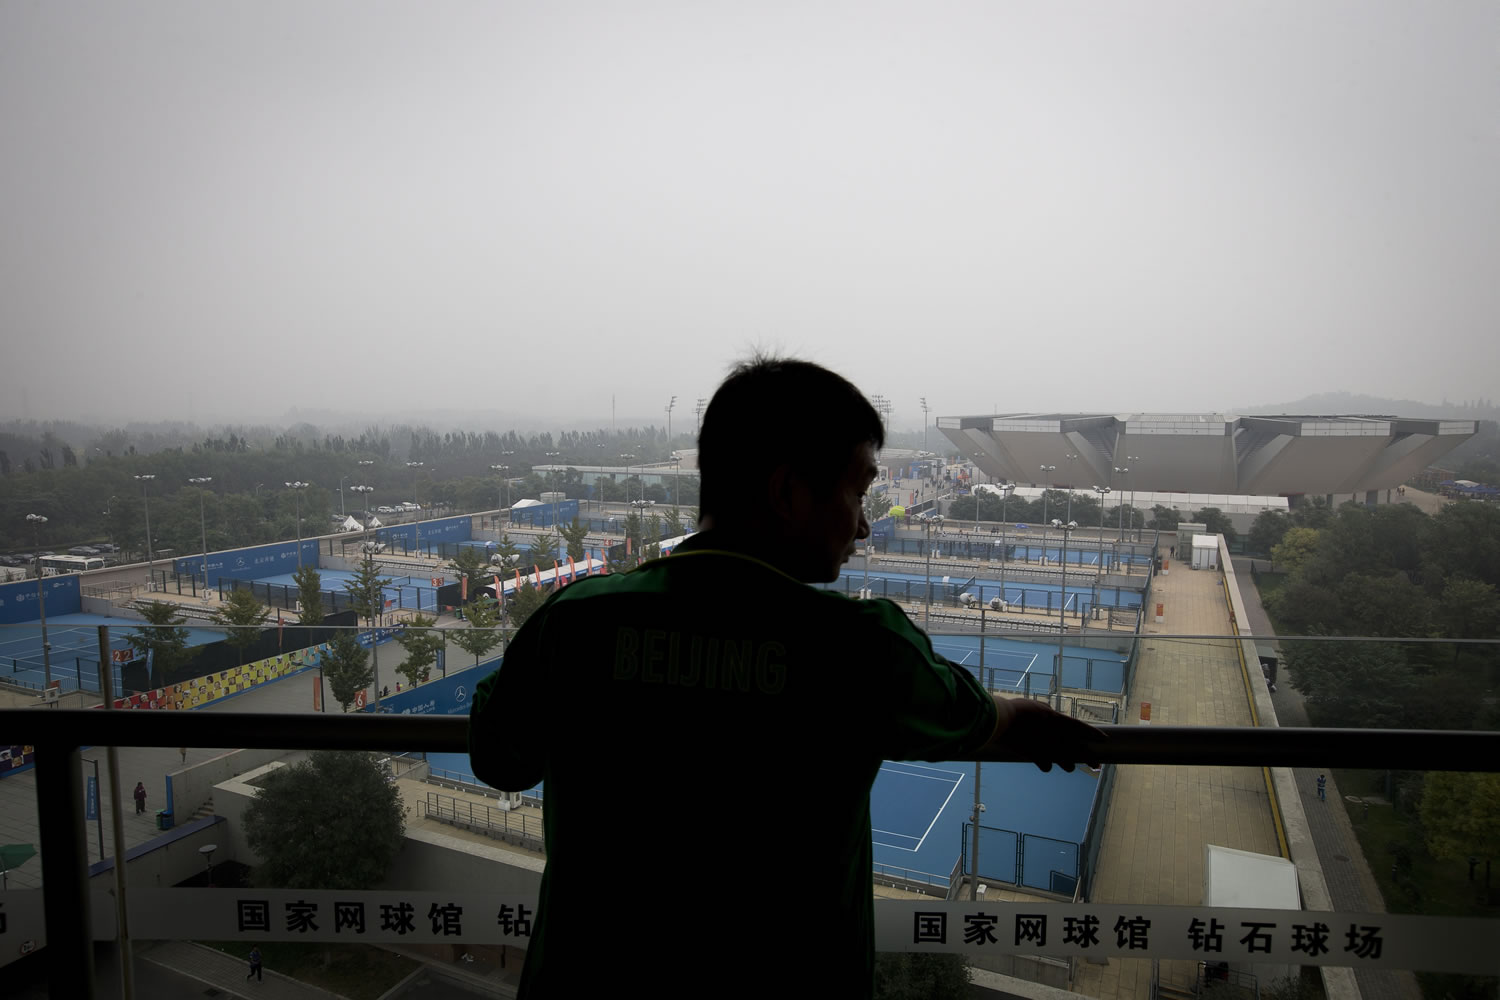 A man stands on the balcony of National Tennis Stadium looks at the tennis courts shrouded by haze in Beijing.